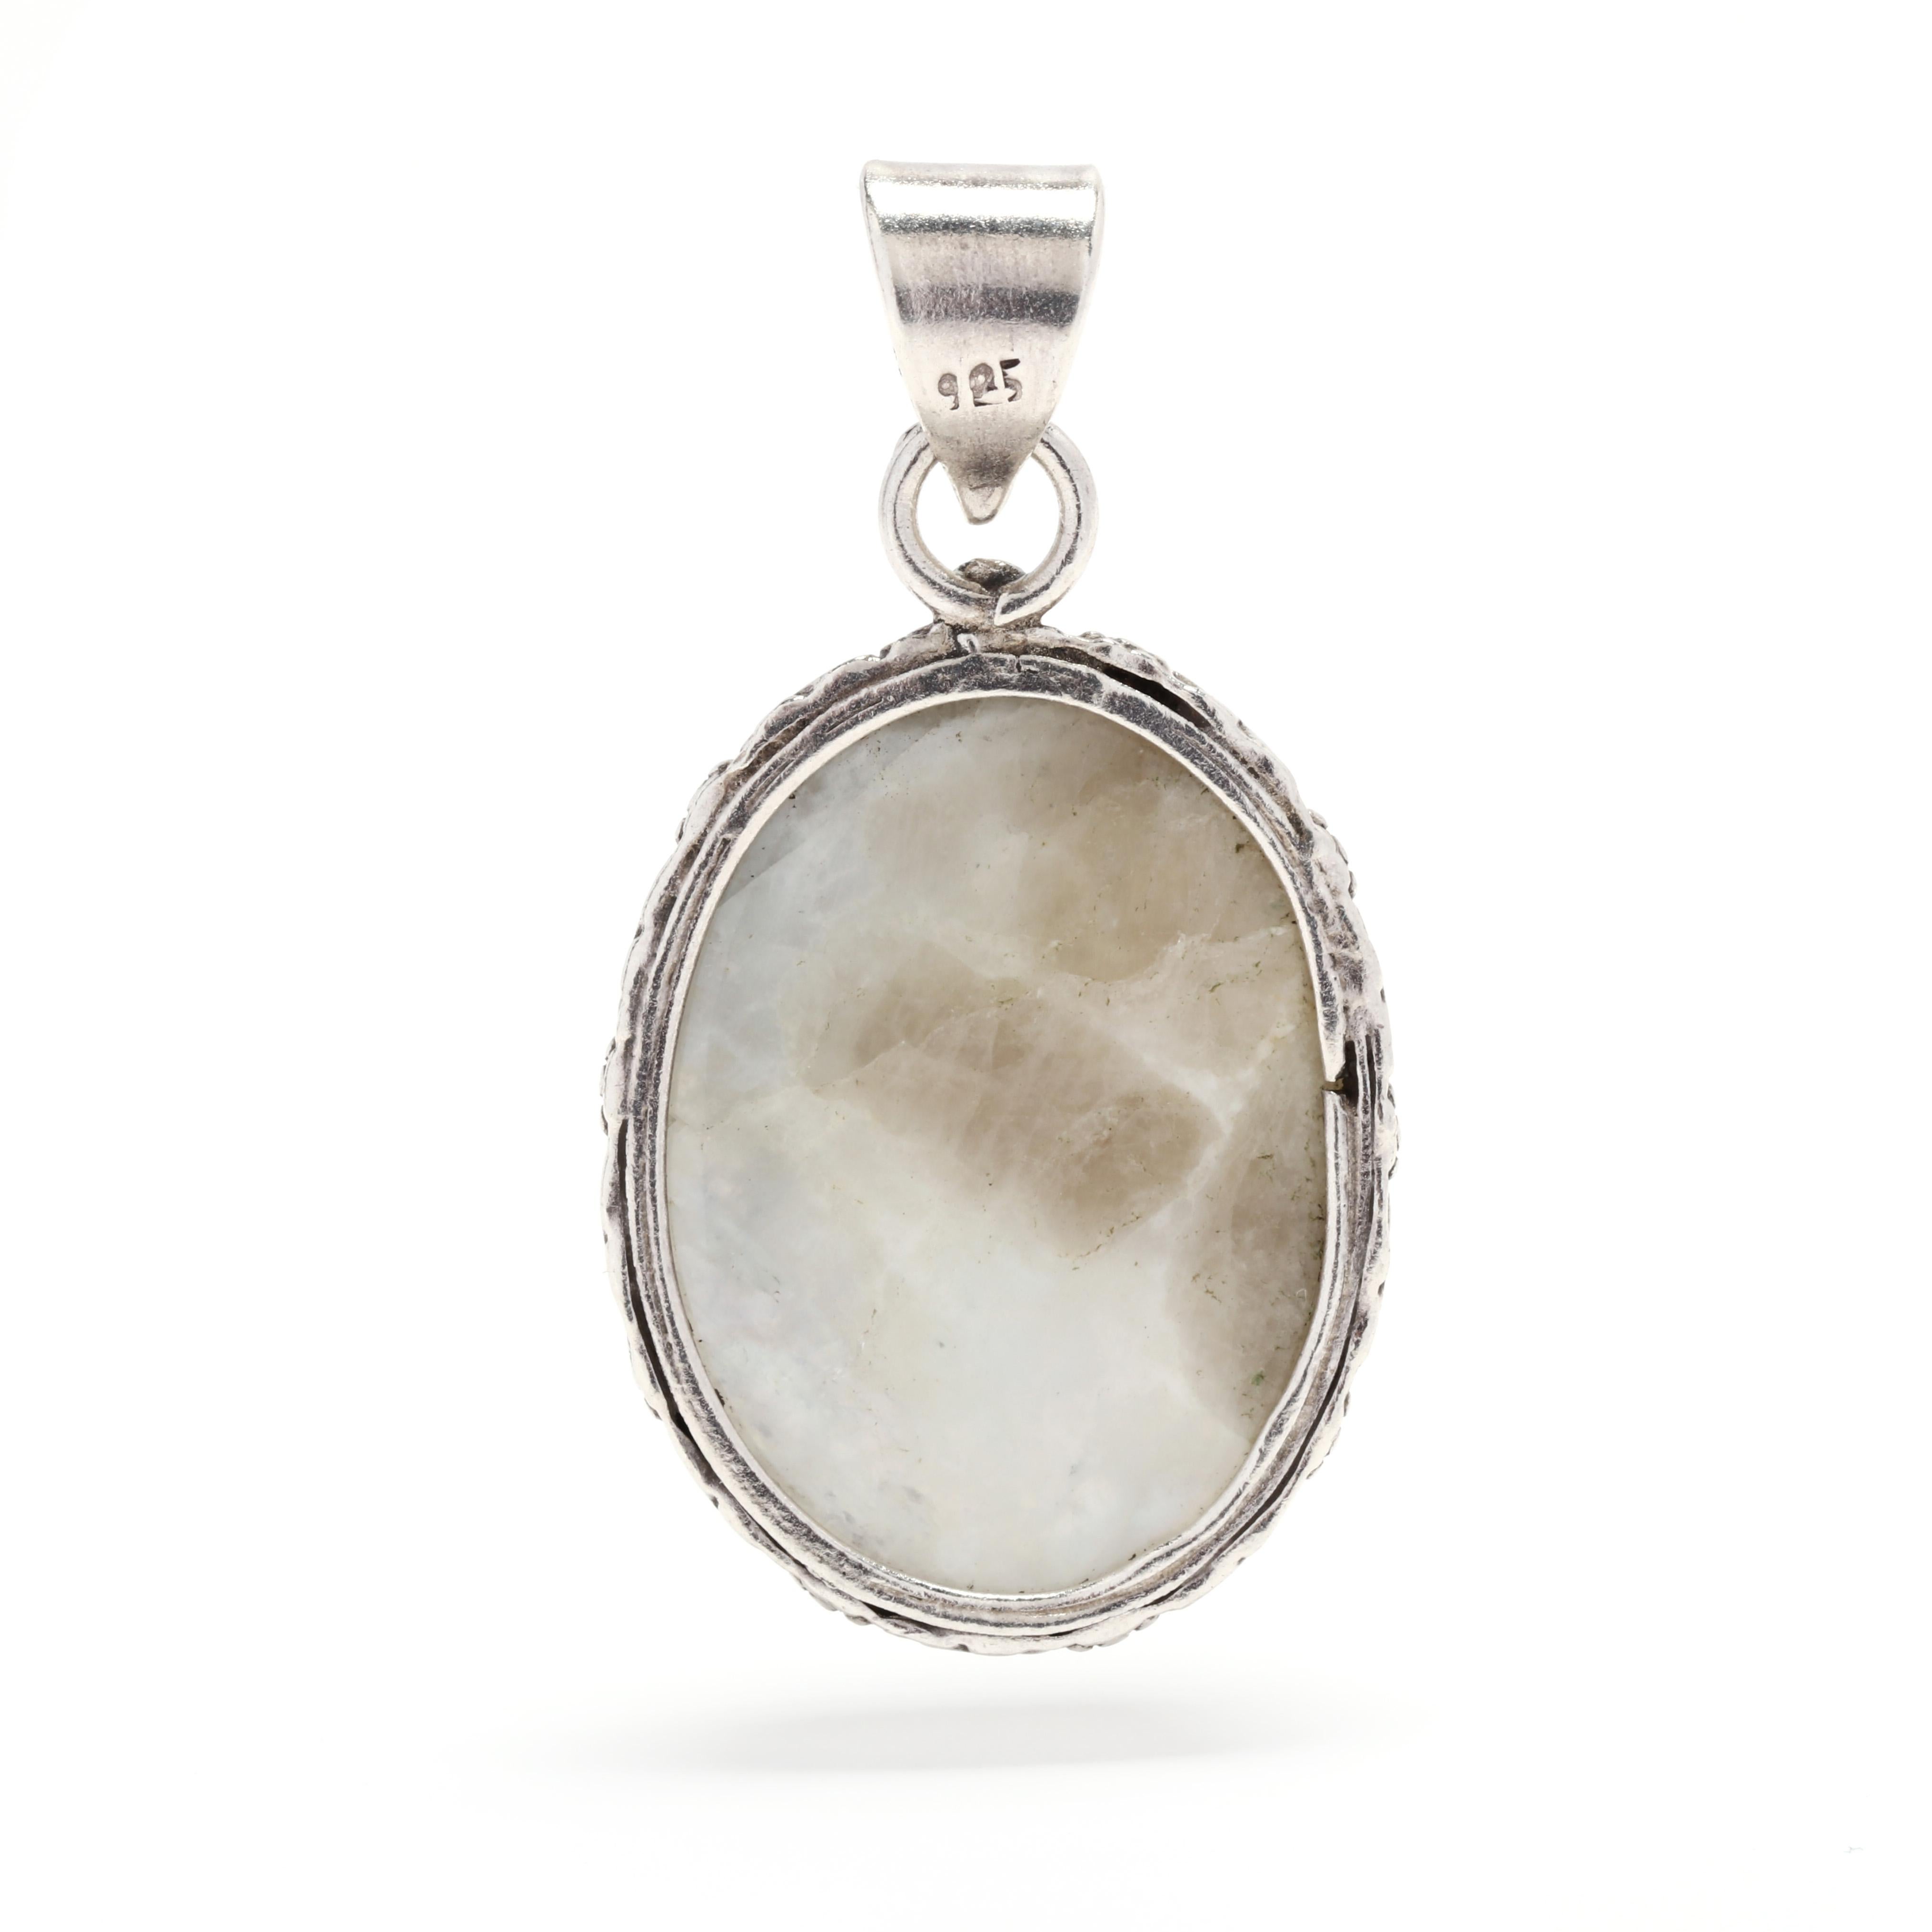 This beautiful vintage moonstone pendant will be a conversation-starter! Crafted from sterling silver, this large pendant features an eye-catching 32.3 carat moonstone gemstone. Its unique design and impressive size make it a showstopper. Perfect